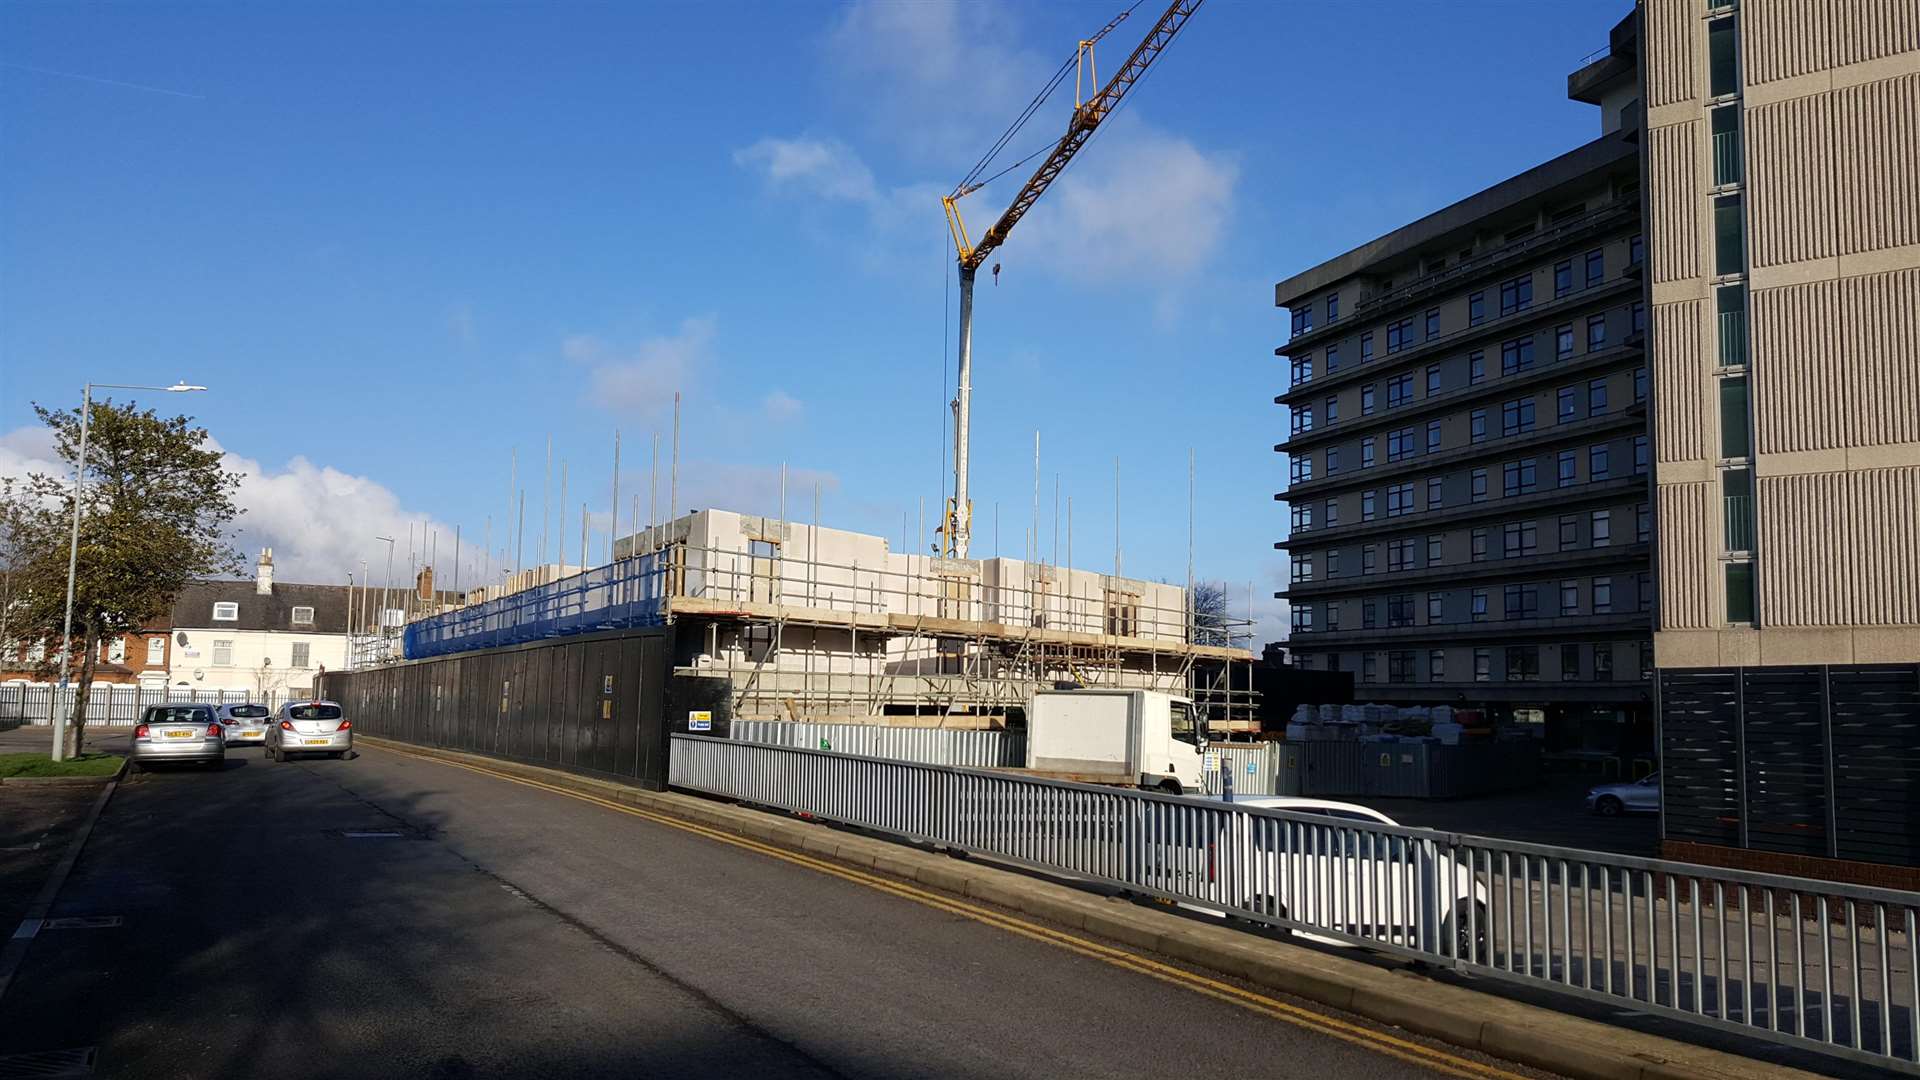 Flats at the Panorama building are being built